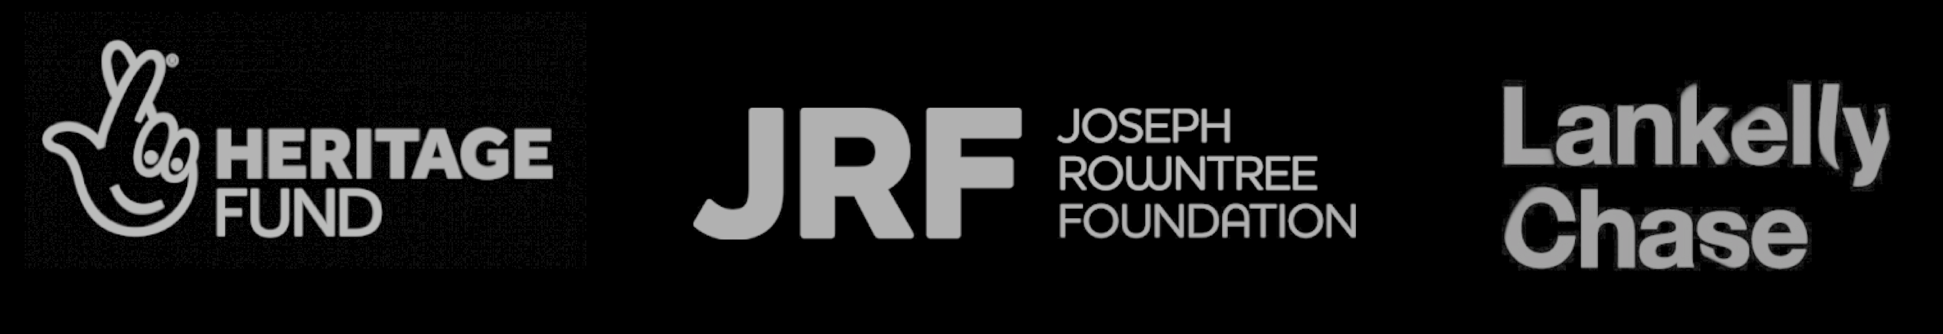 logos of funders, including JRF, HLF, Lankelly Chase 